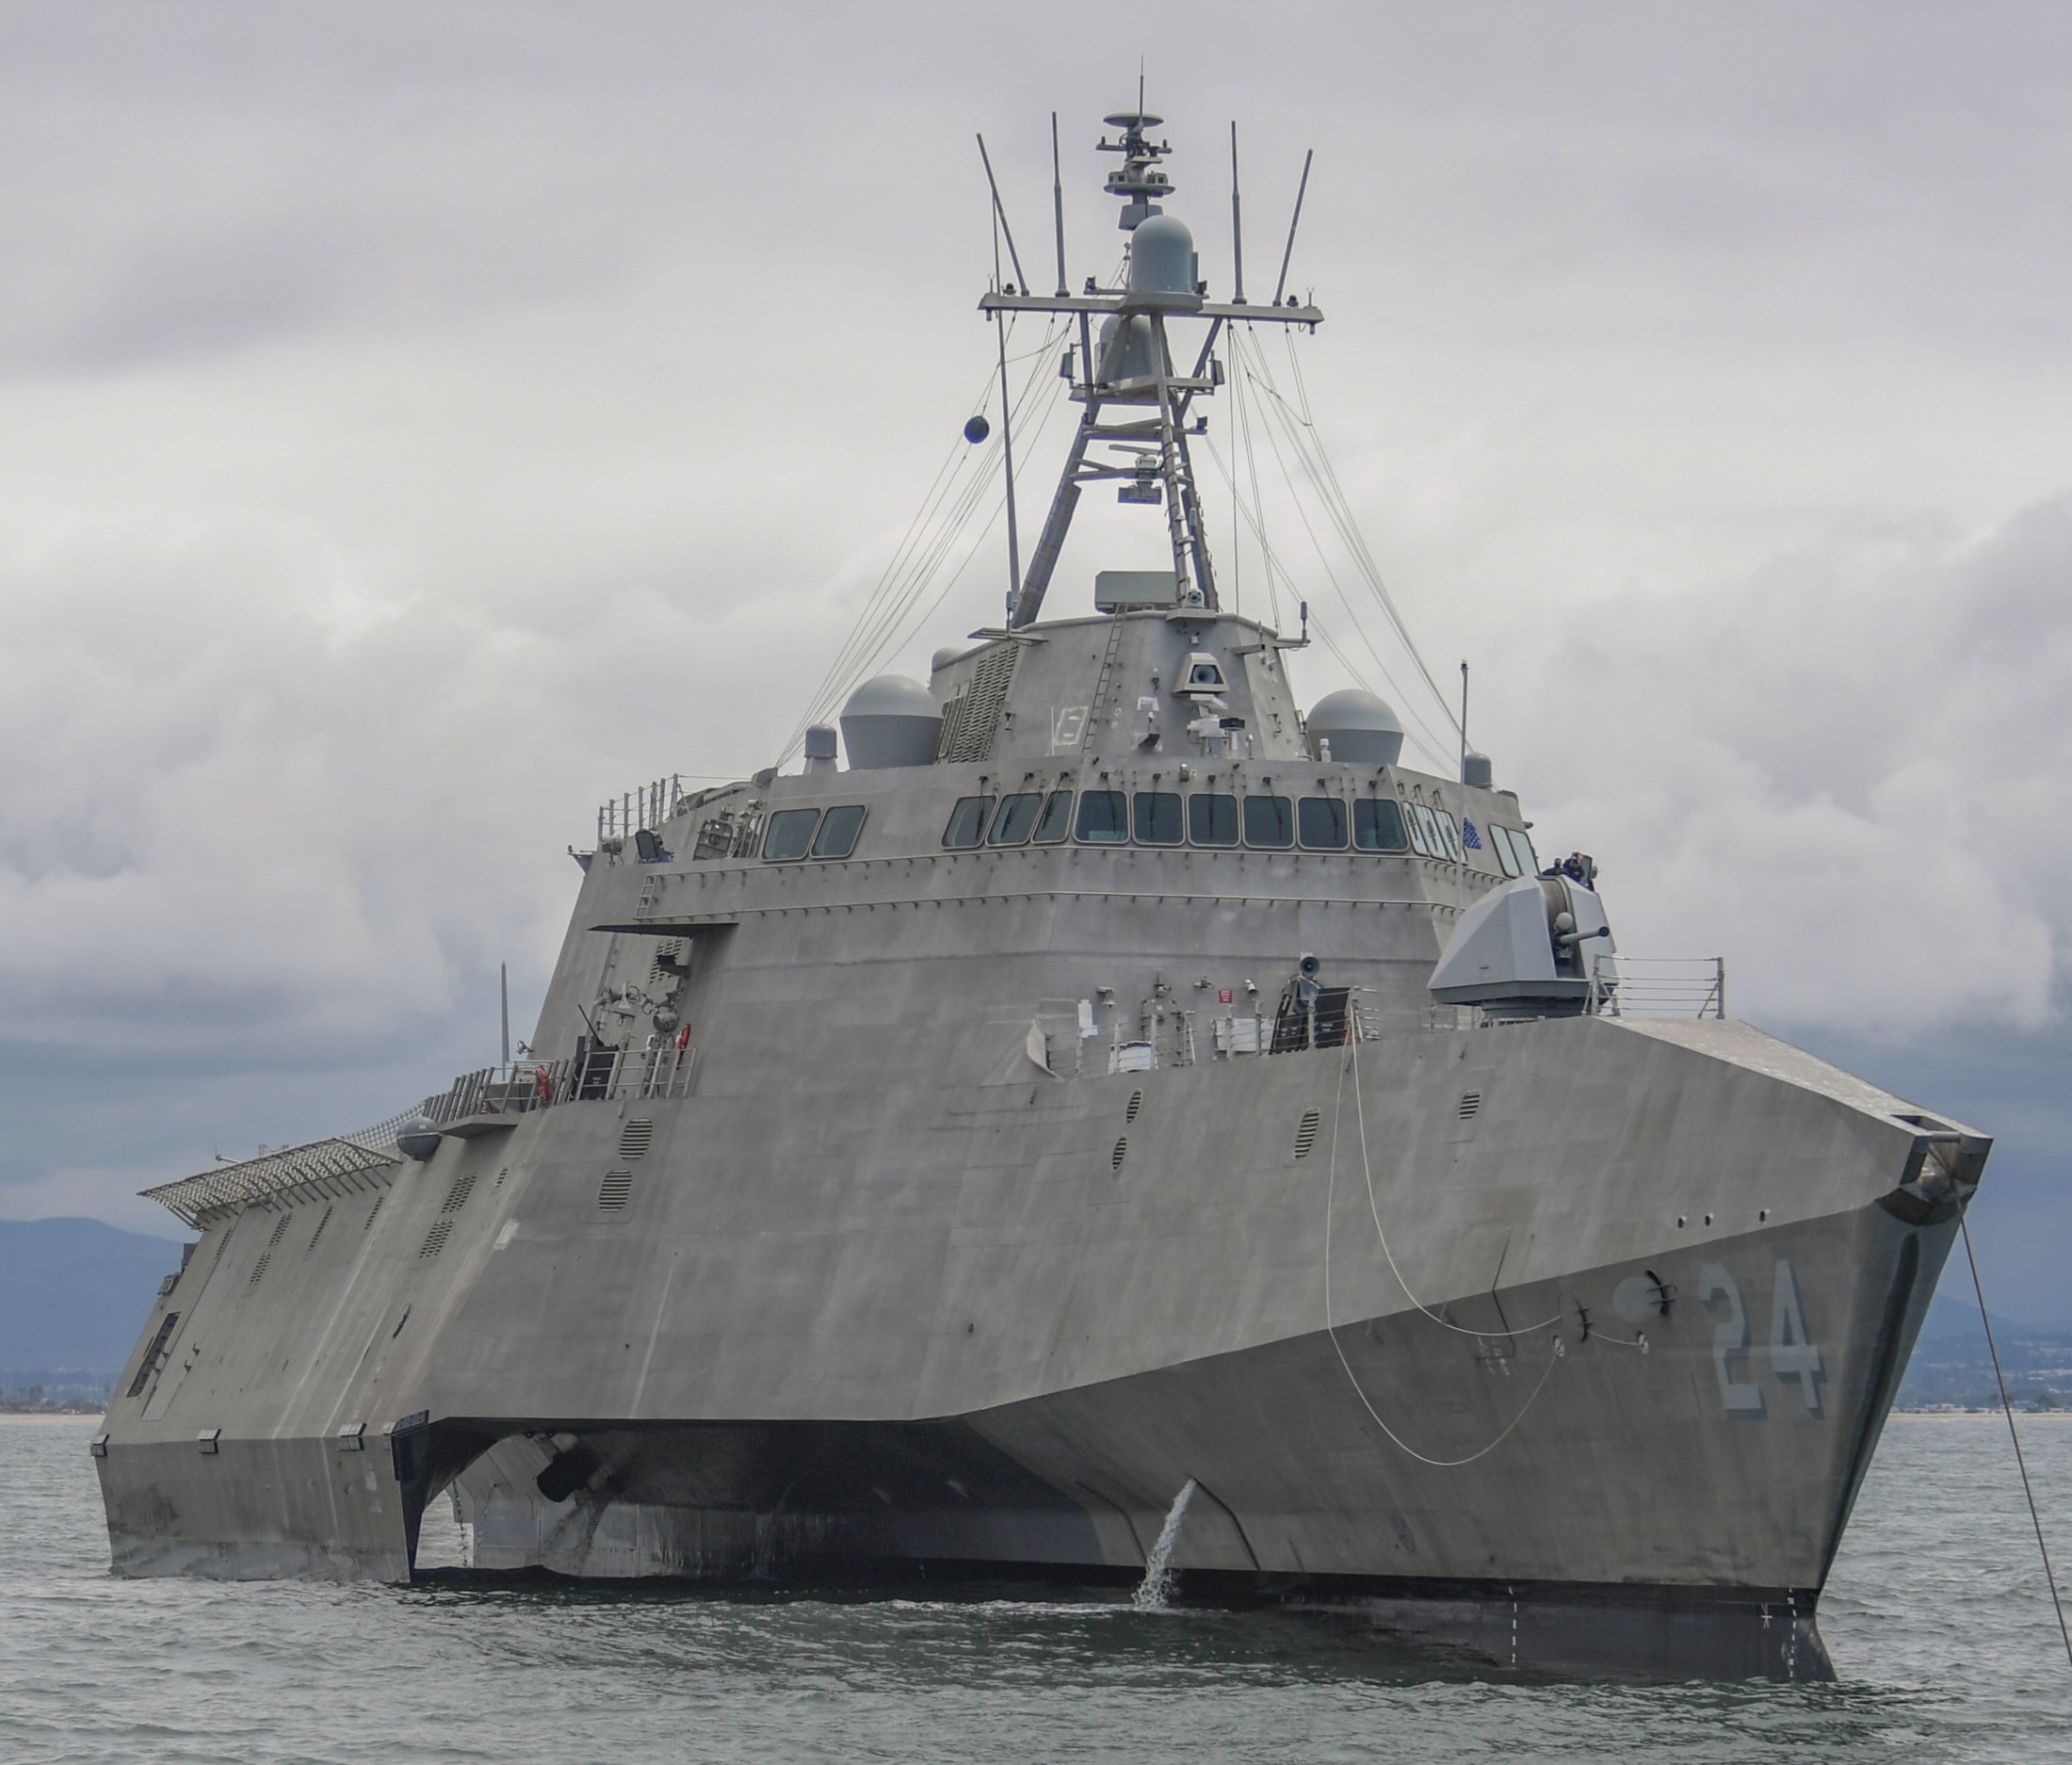 lcs-24 uss oakland independence class littoral combat ship us navy 11 san diego california